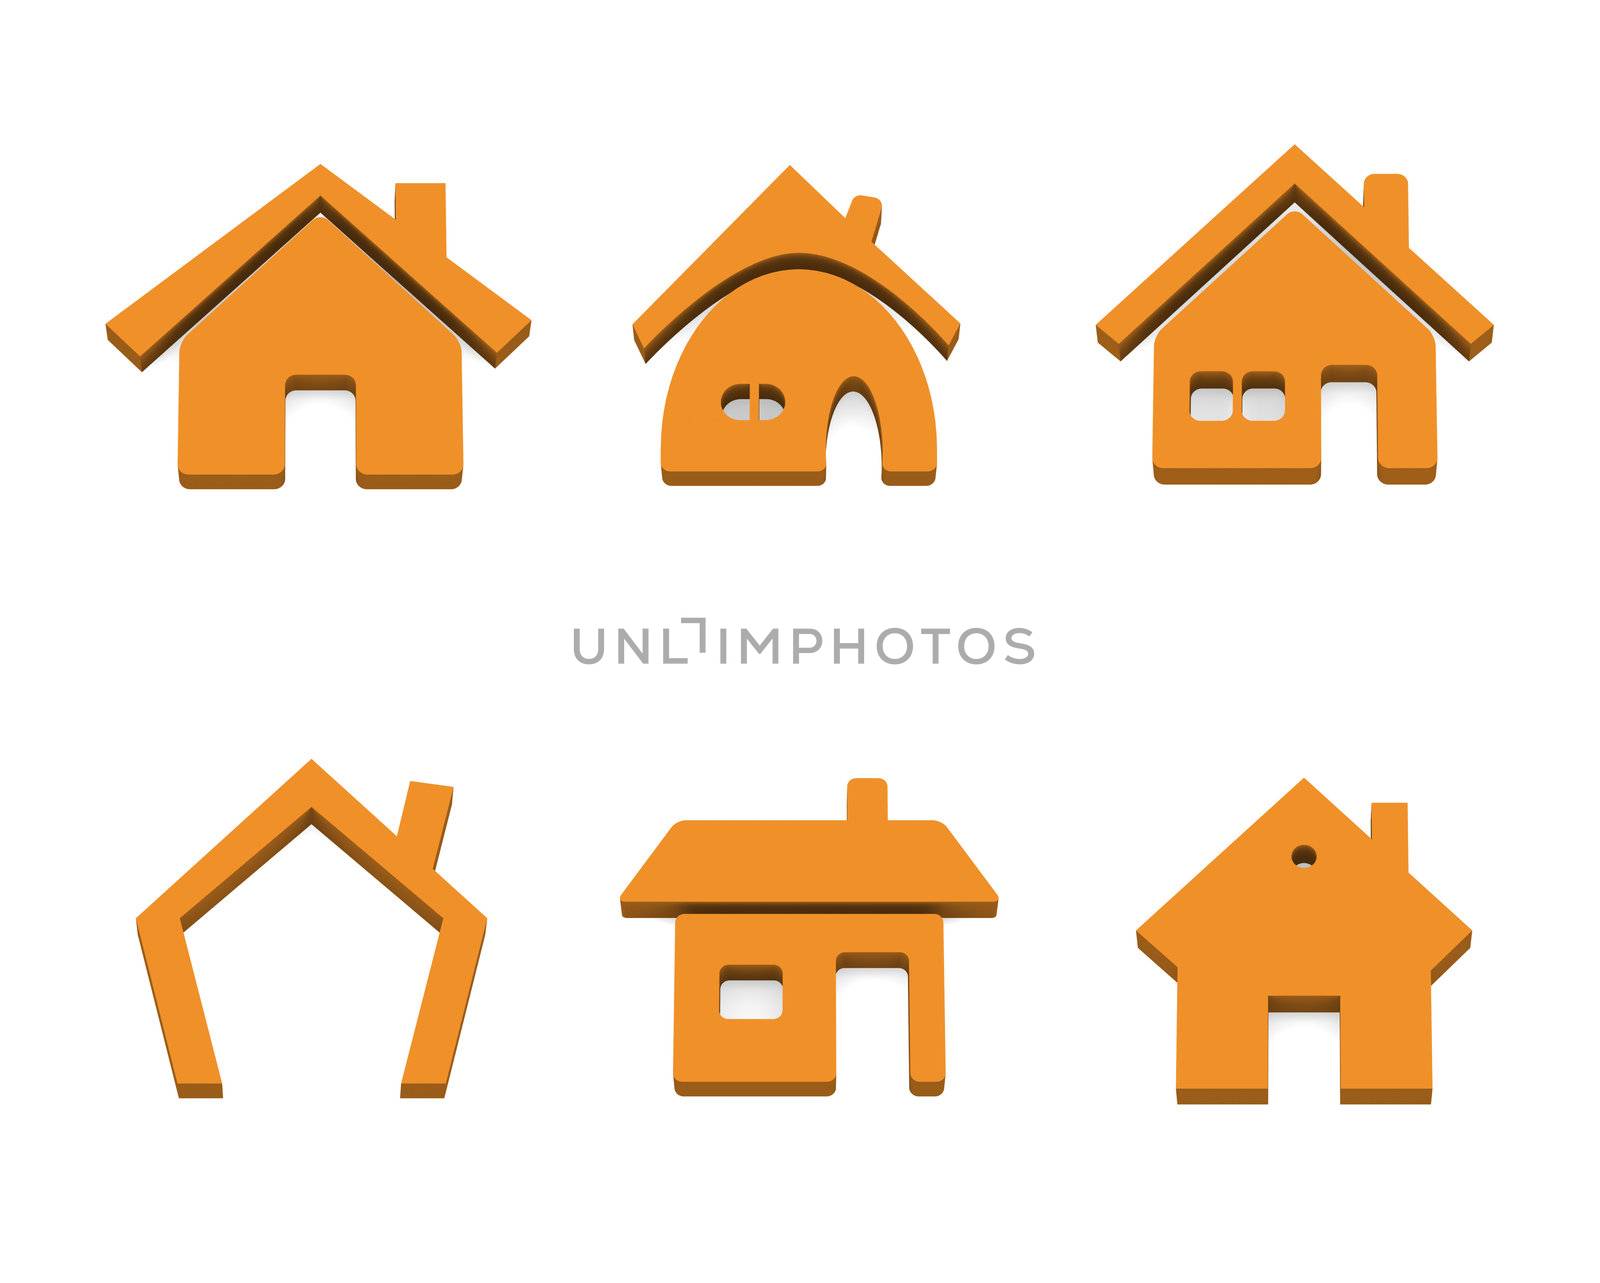 Set of 6 house icons by skvoor